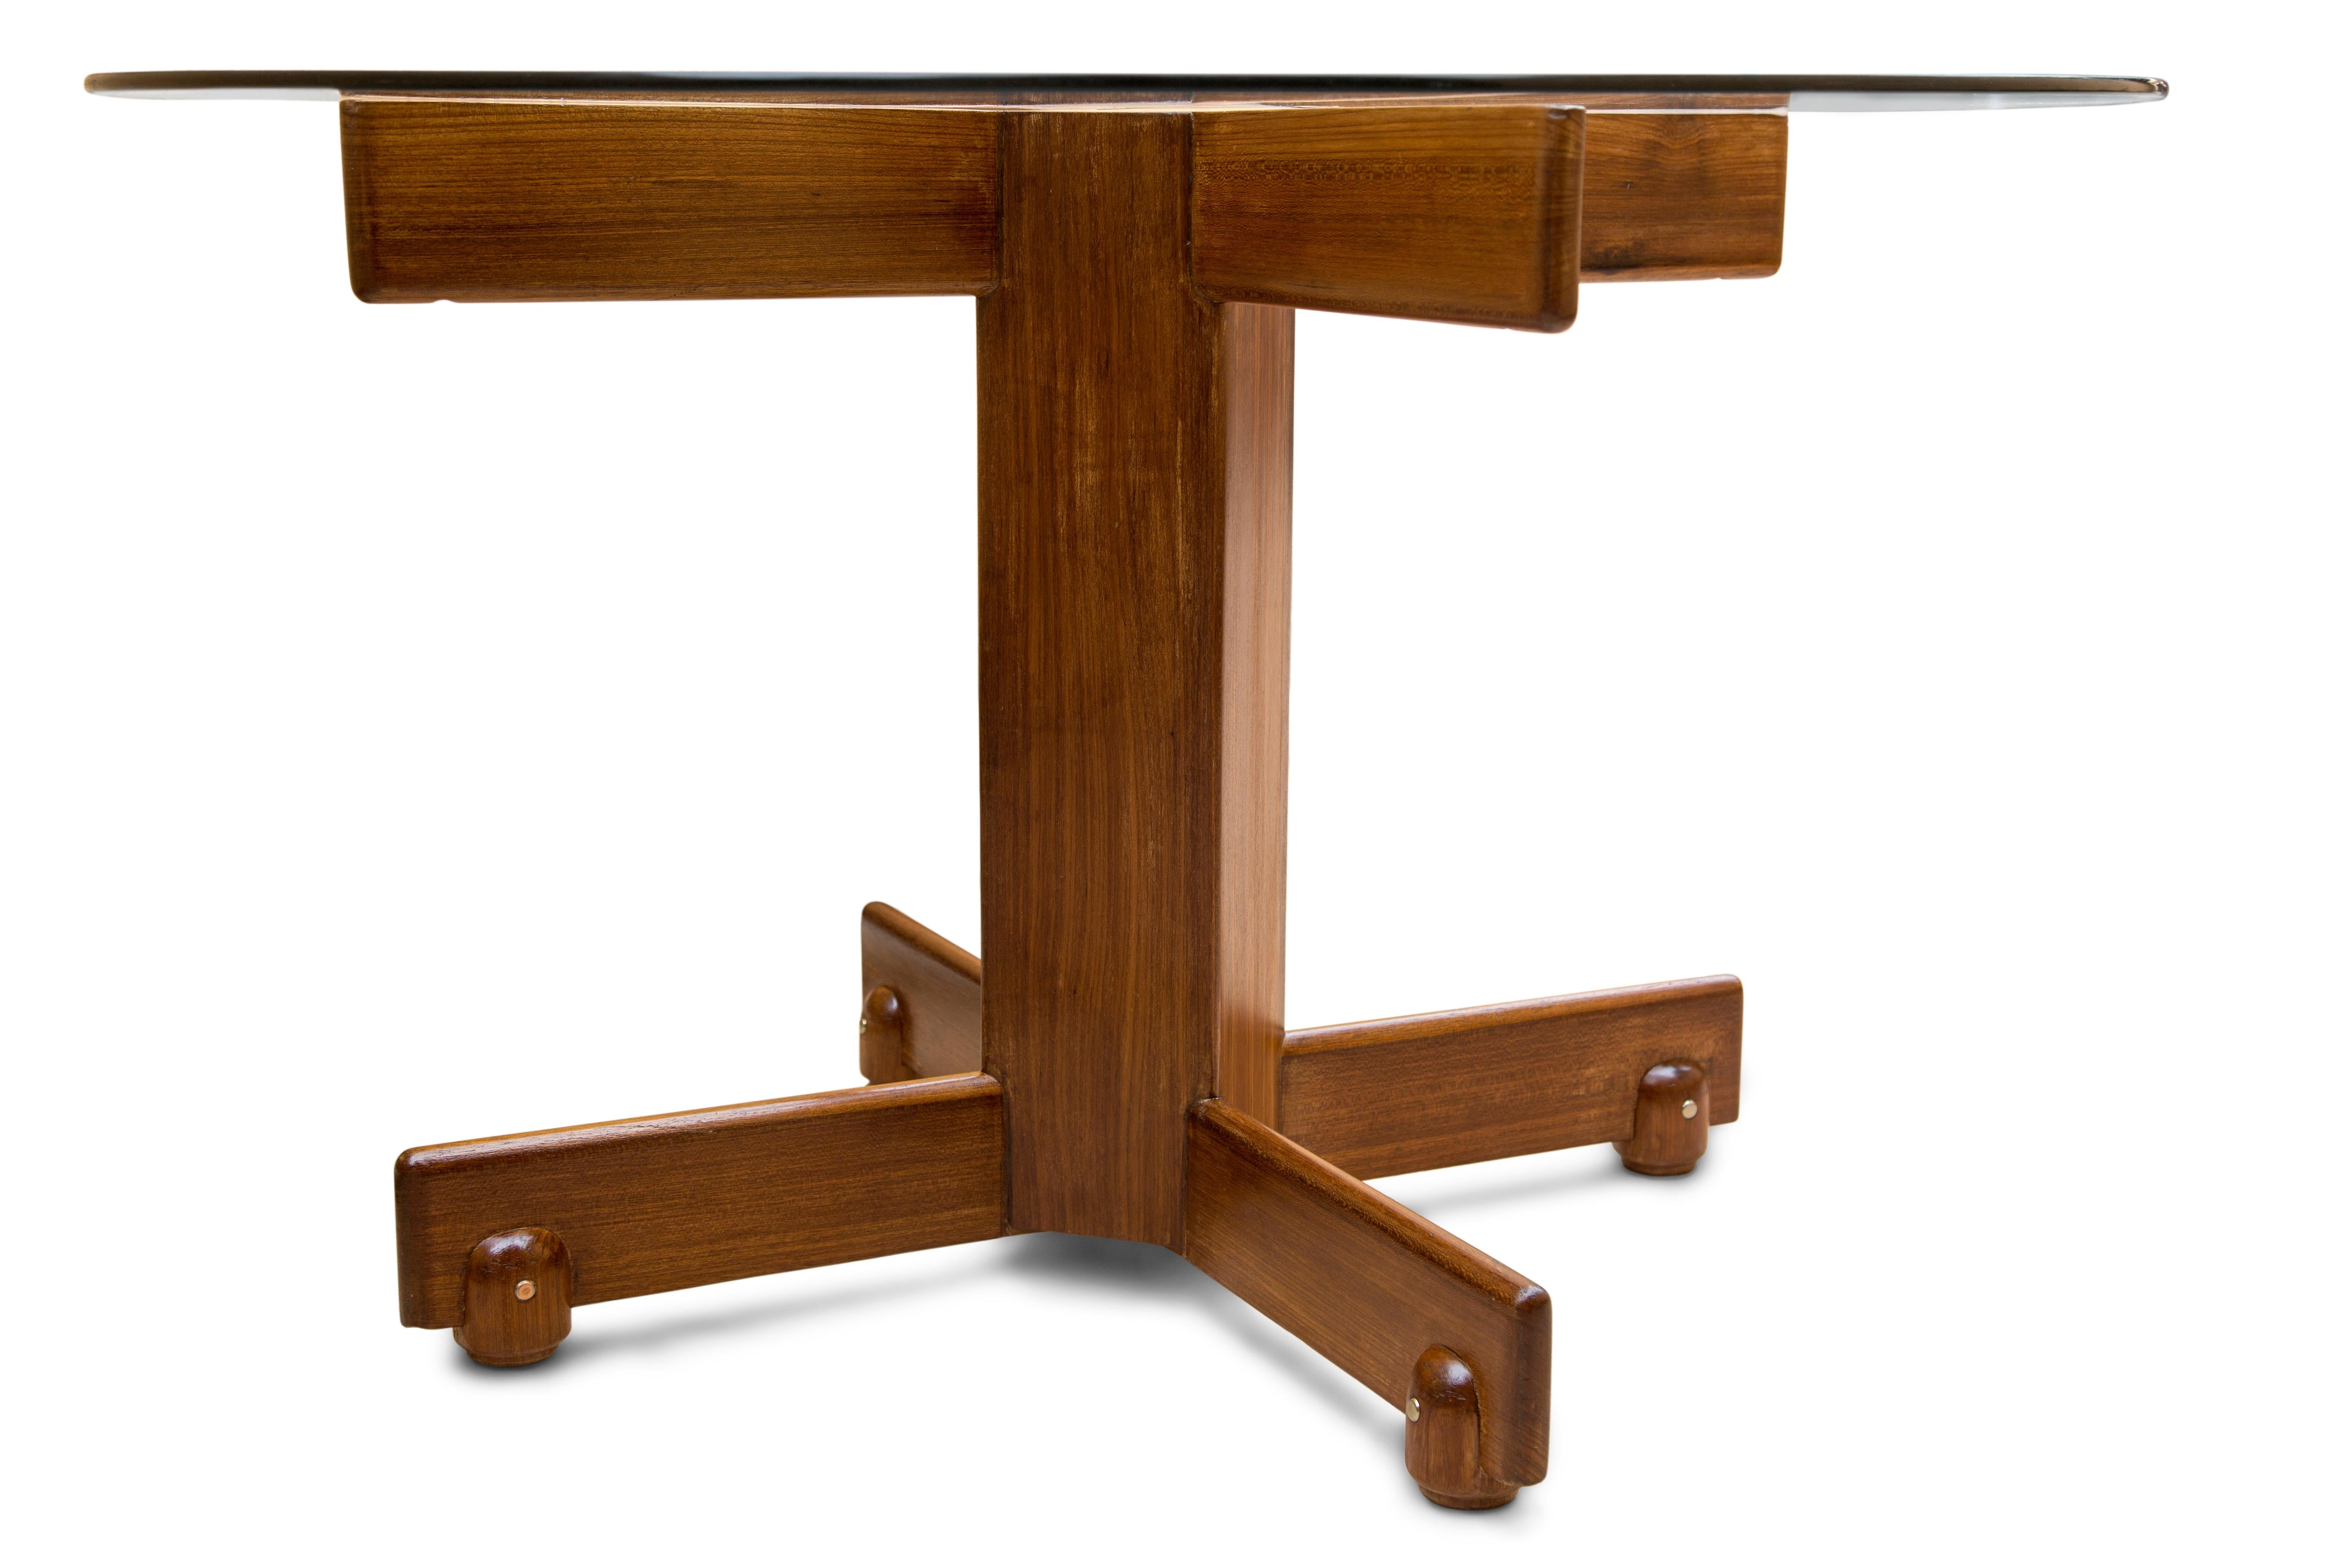 Metalwork “Alex” Dining Table in Hardwood & Glass by Sergio Rodrigues, 1960s For Sale